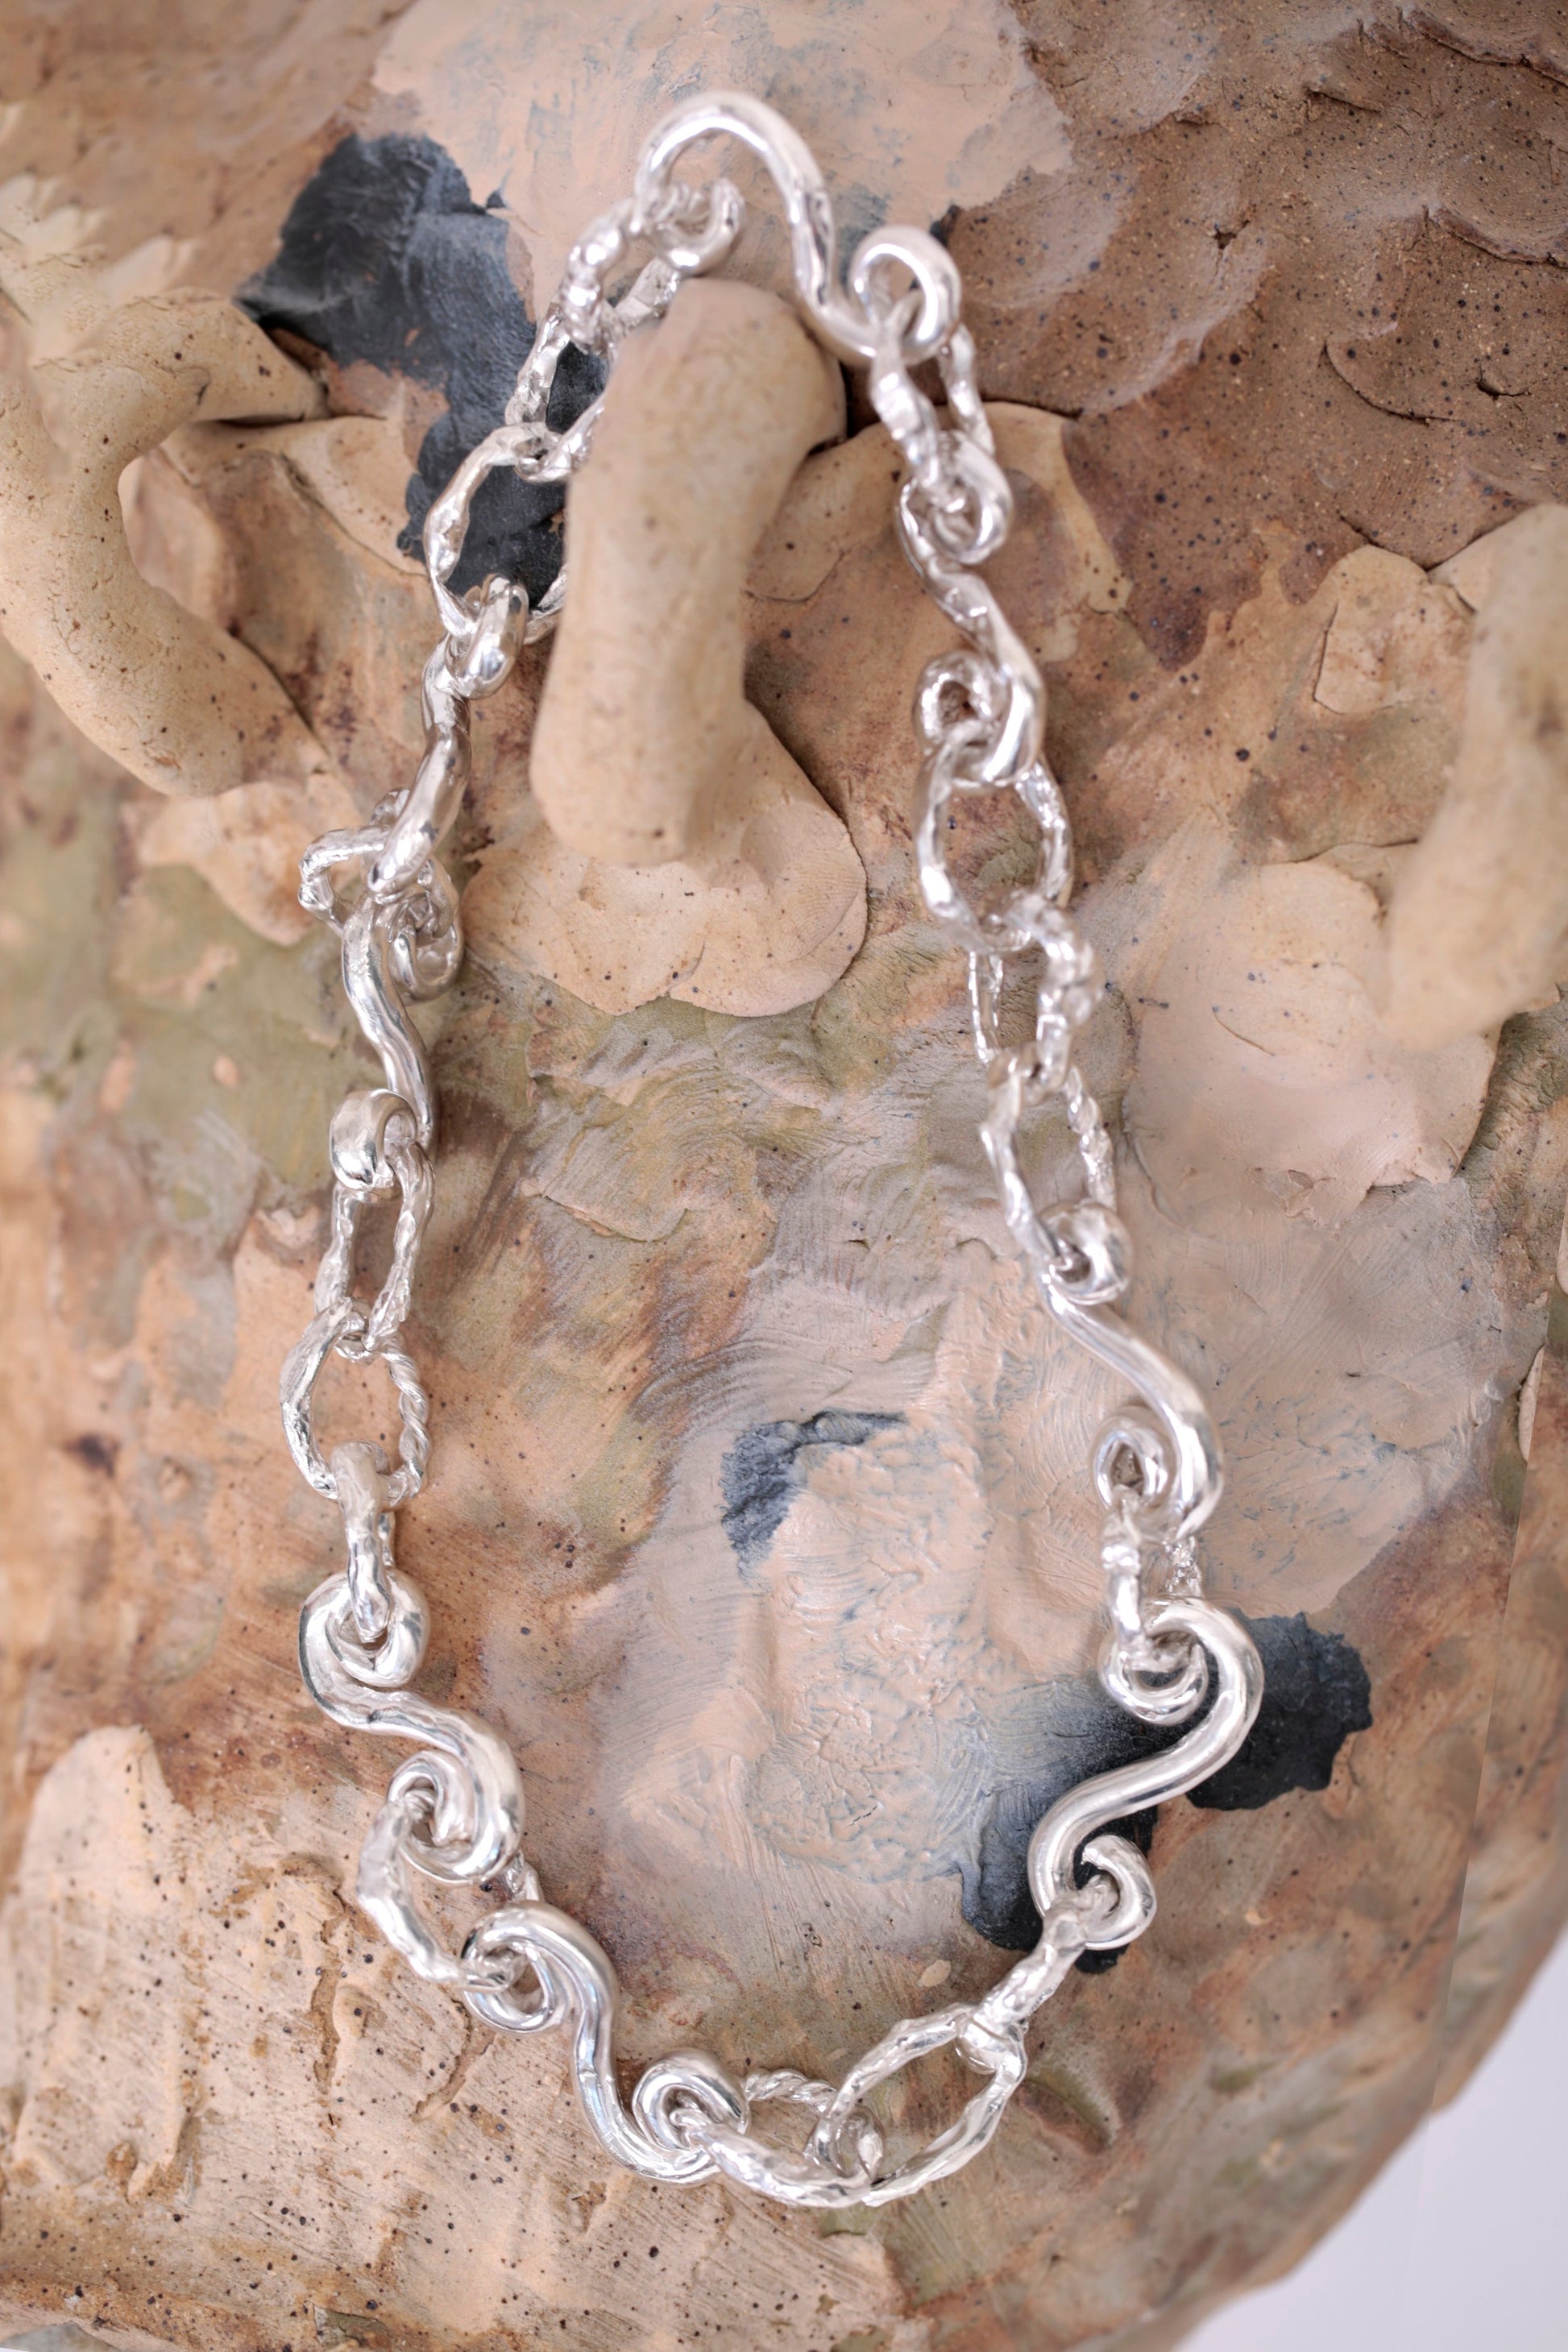 Product photo of CLARK Braided Waves Necklace. This organic and oceanic necklace features spiraling links connected to form a choker chain, exuding a unique and striking appearance that is sure to make you stand out from the crowd.